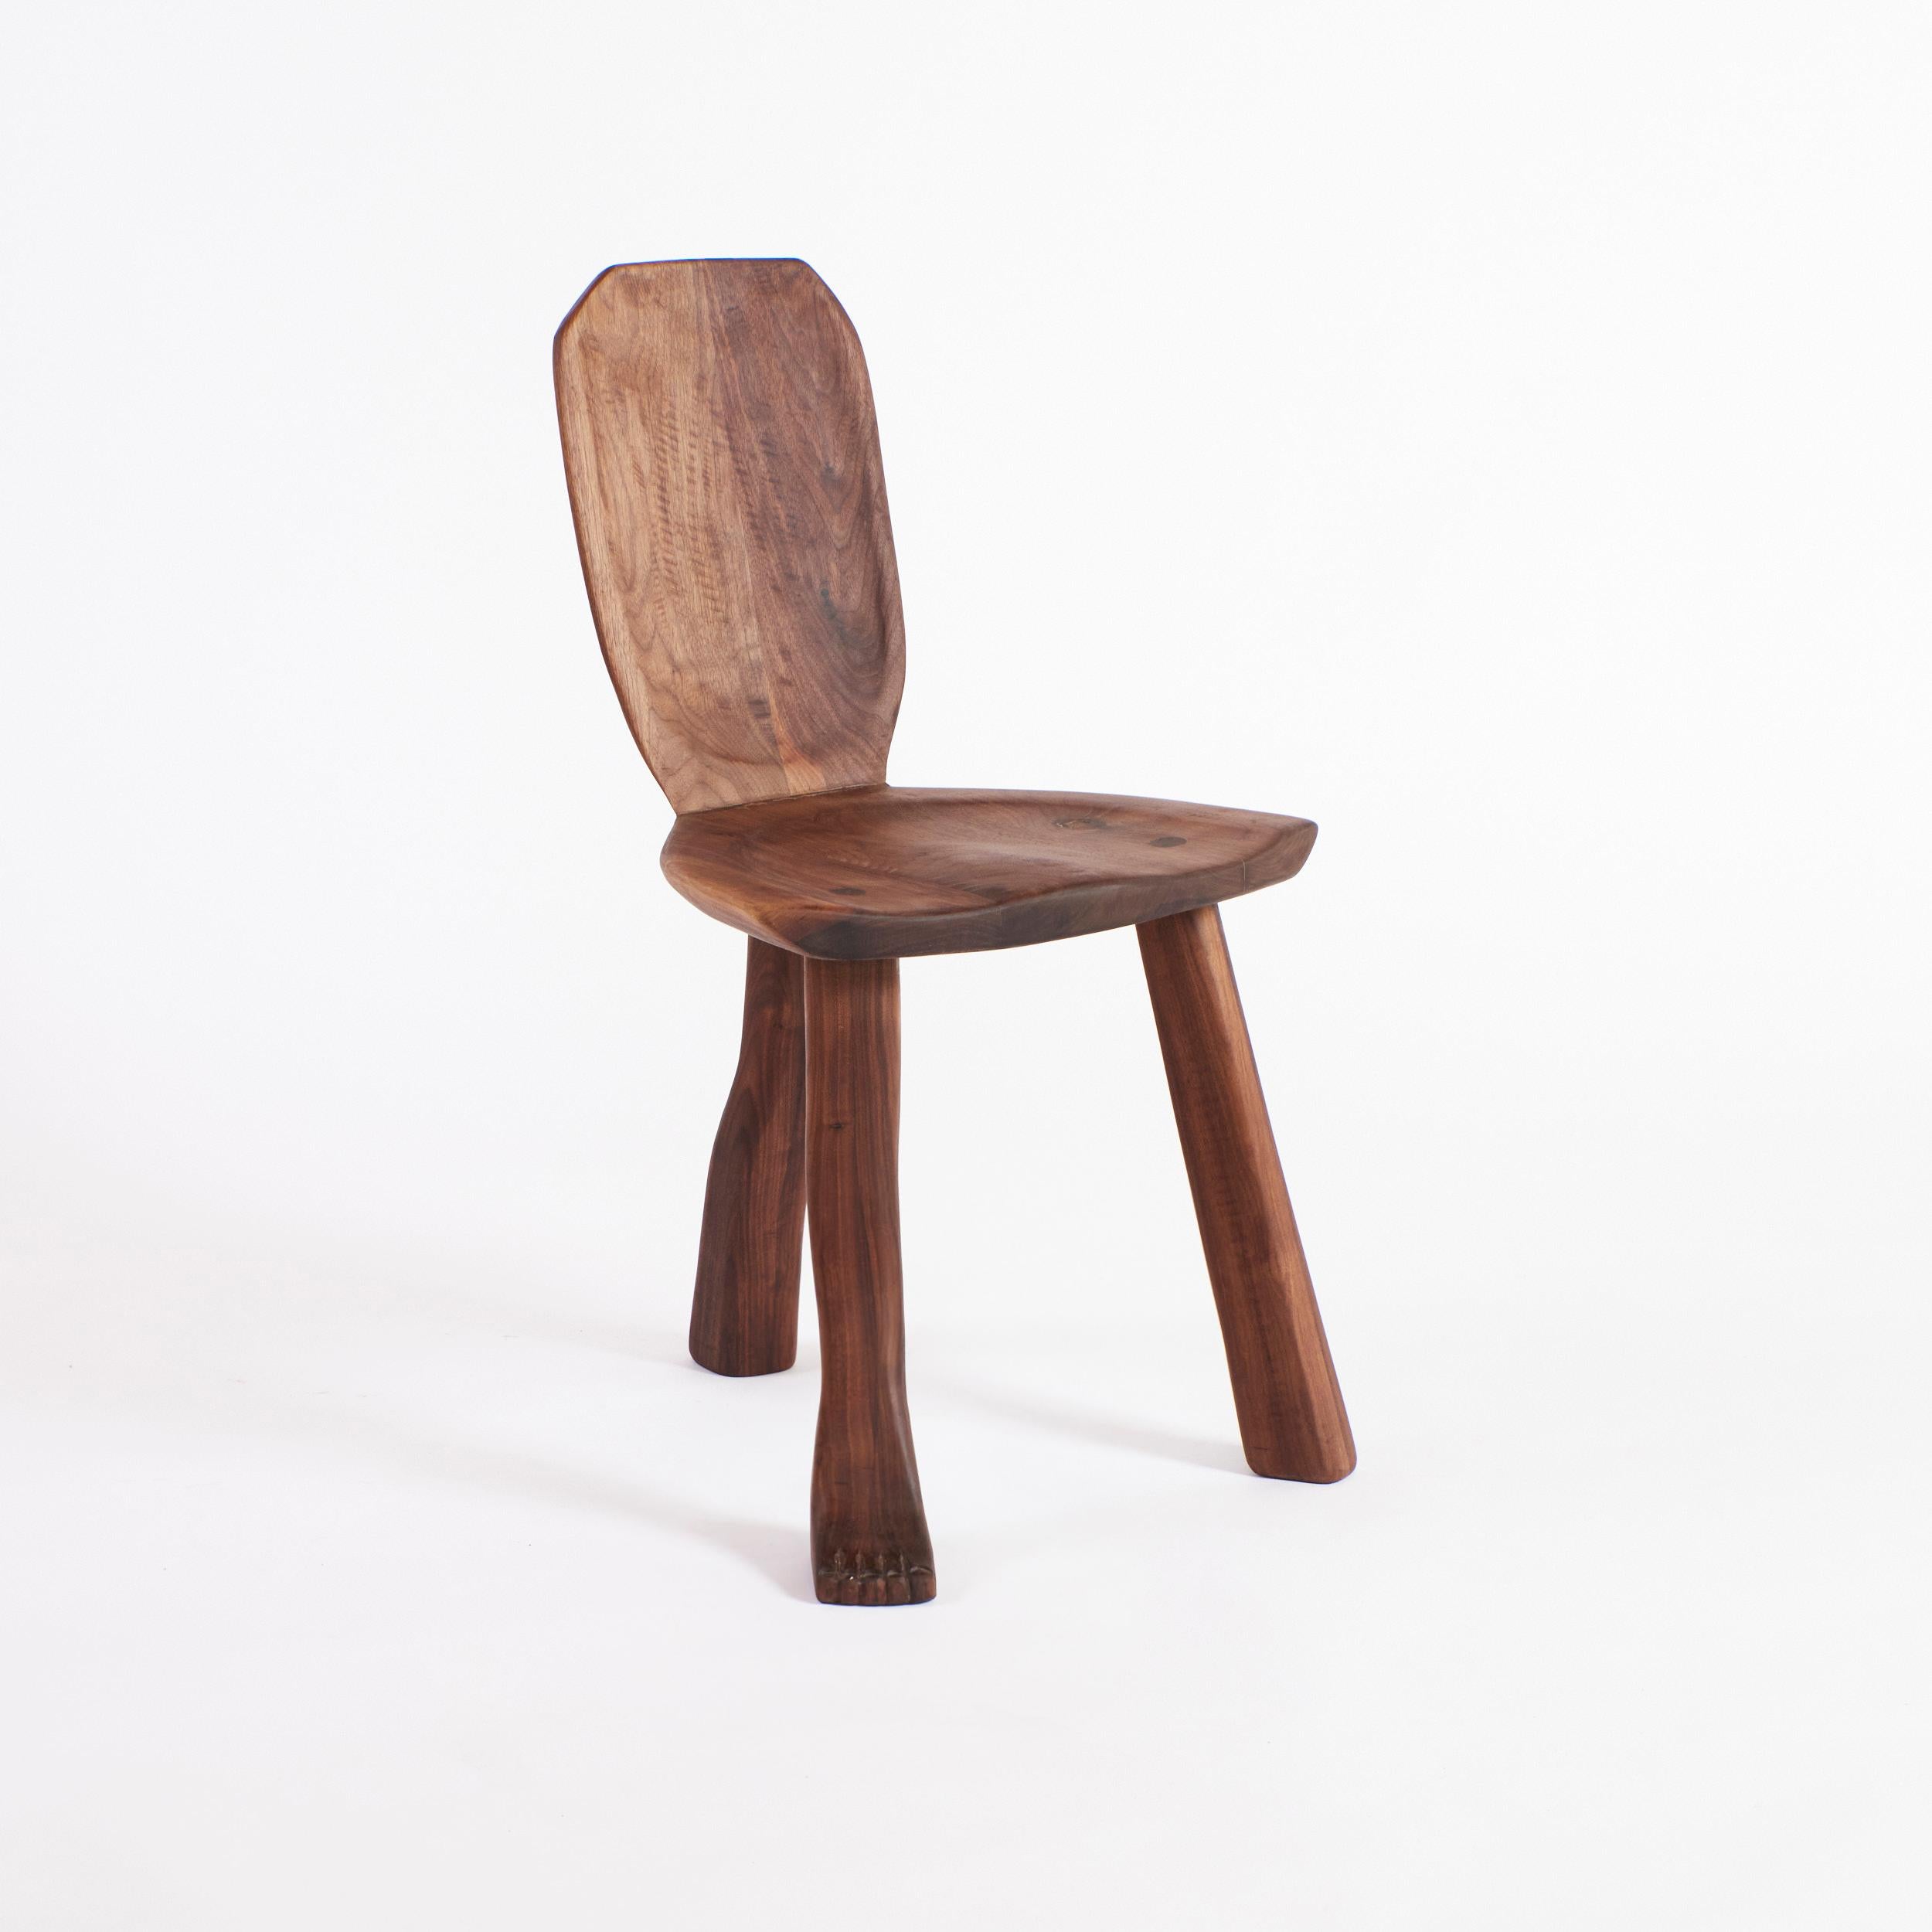 Foot Accent Chair in Walnut Wood
Designed by Project 213A in 2023 as part of the Brand's signature Foot Collection.

The 